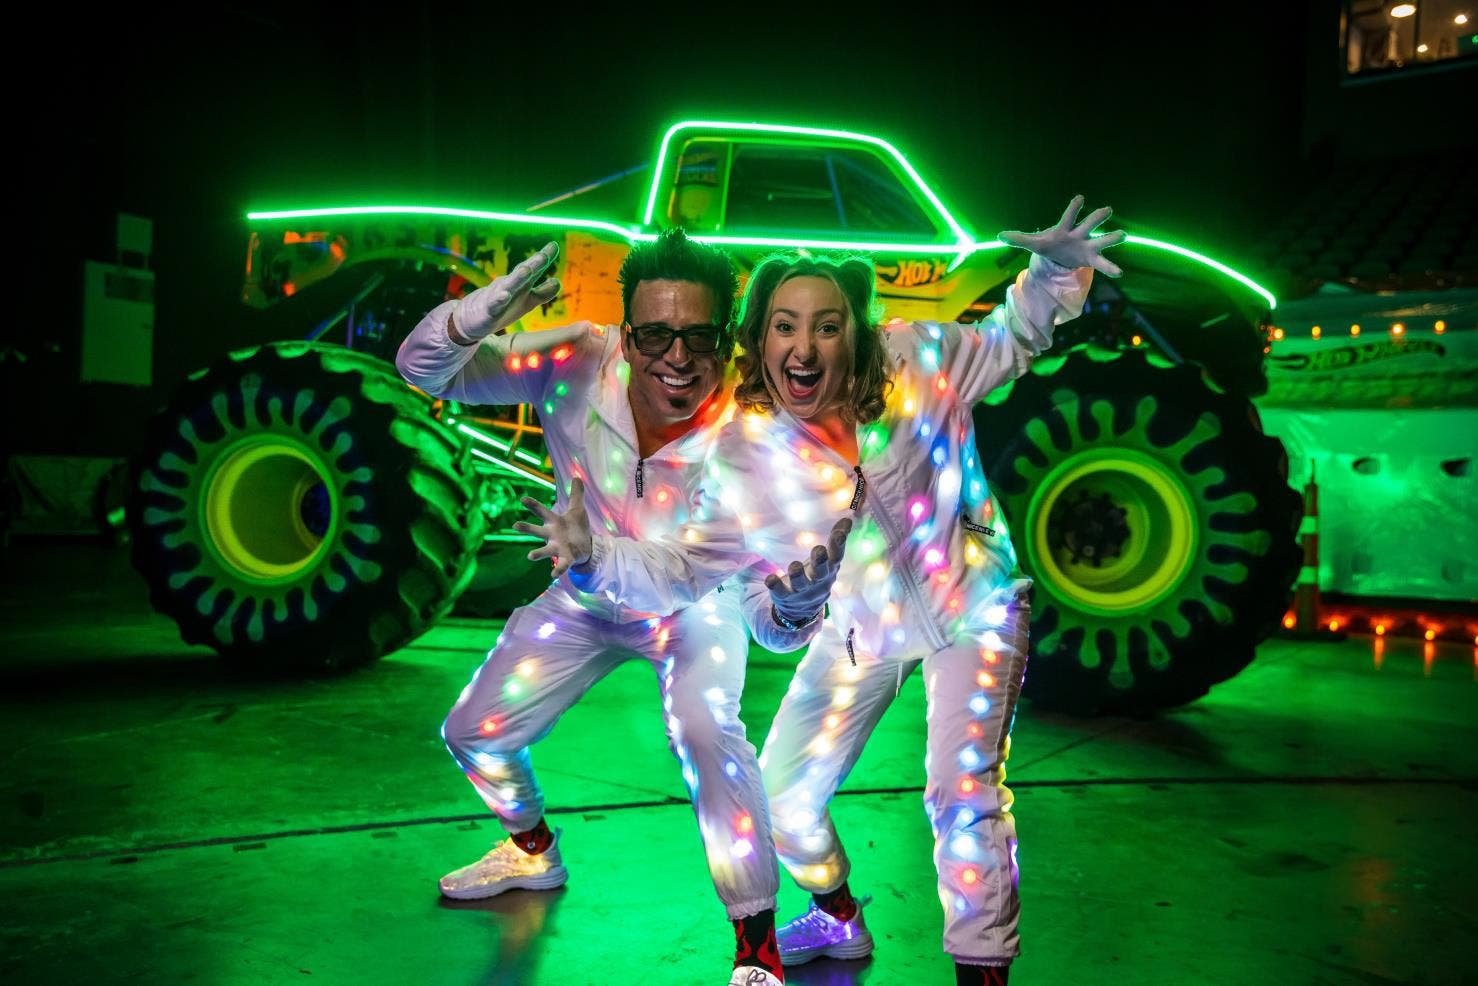 hot-wheels-monster-trucks-live-glow-party-announcers___15191409205.jpg